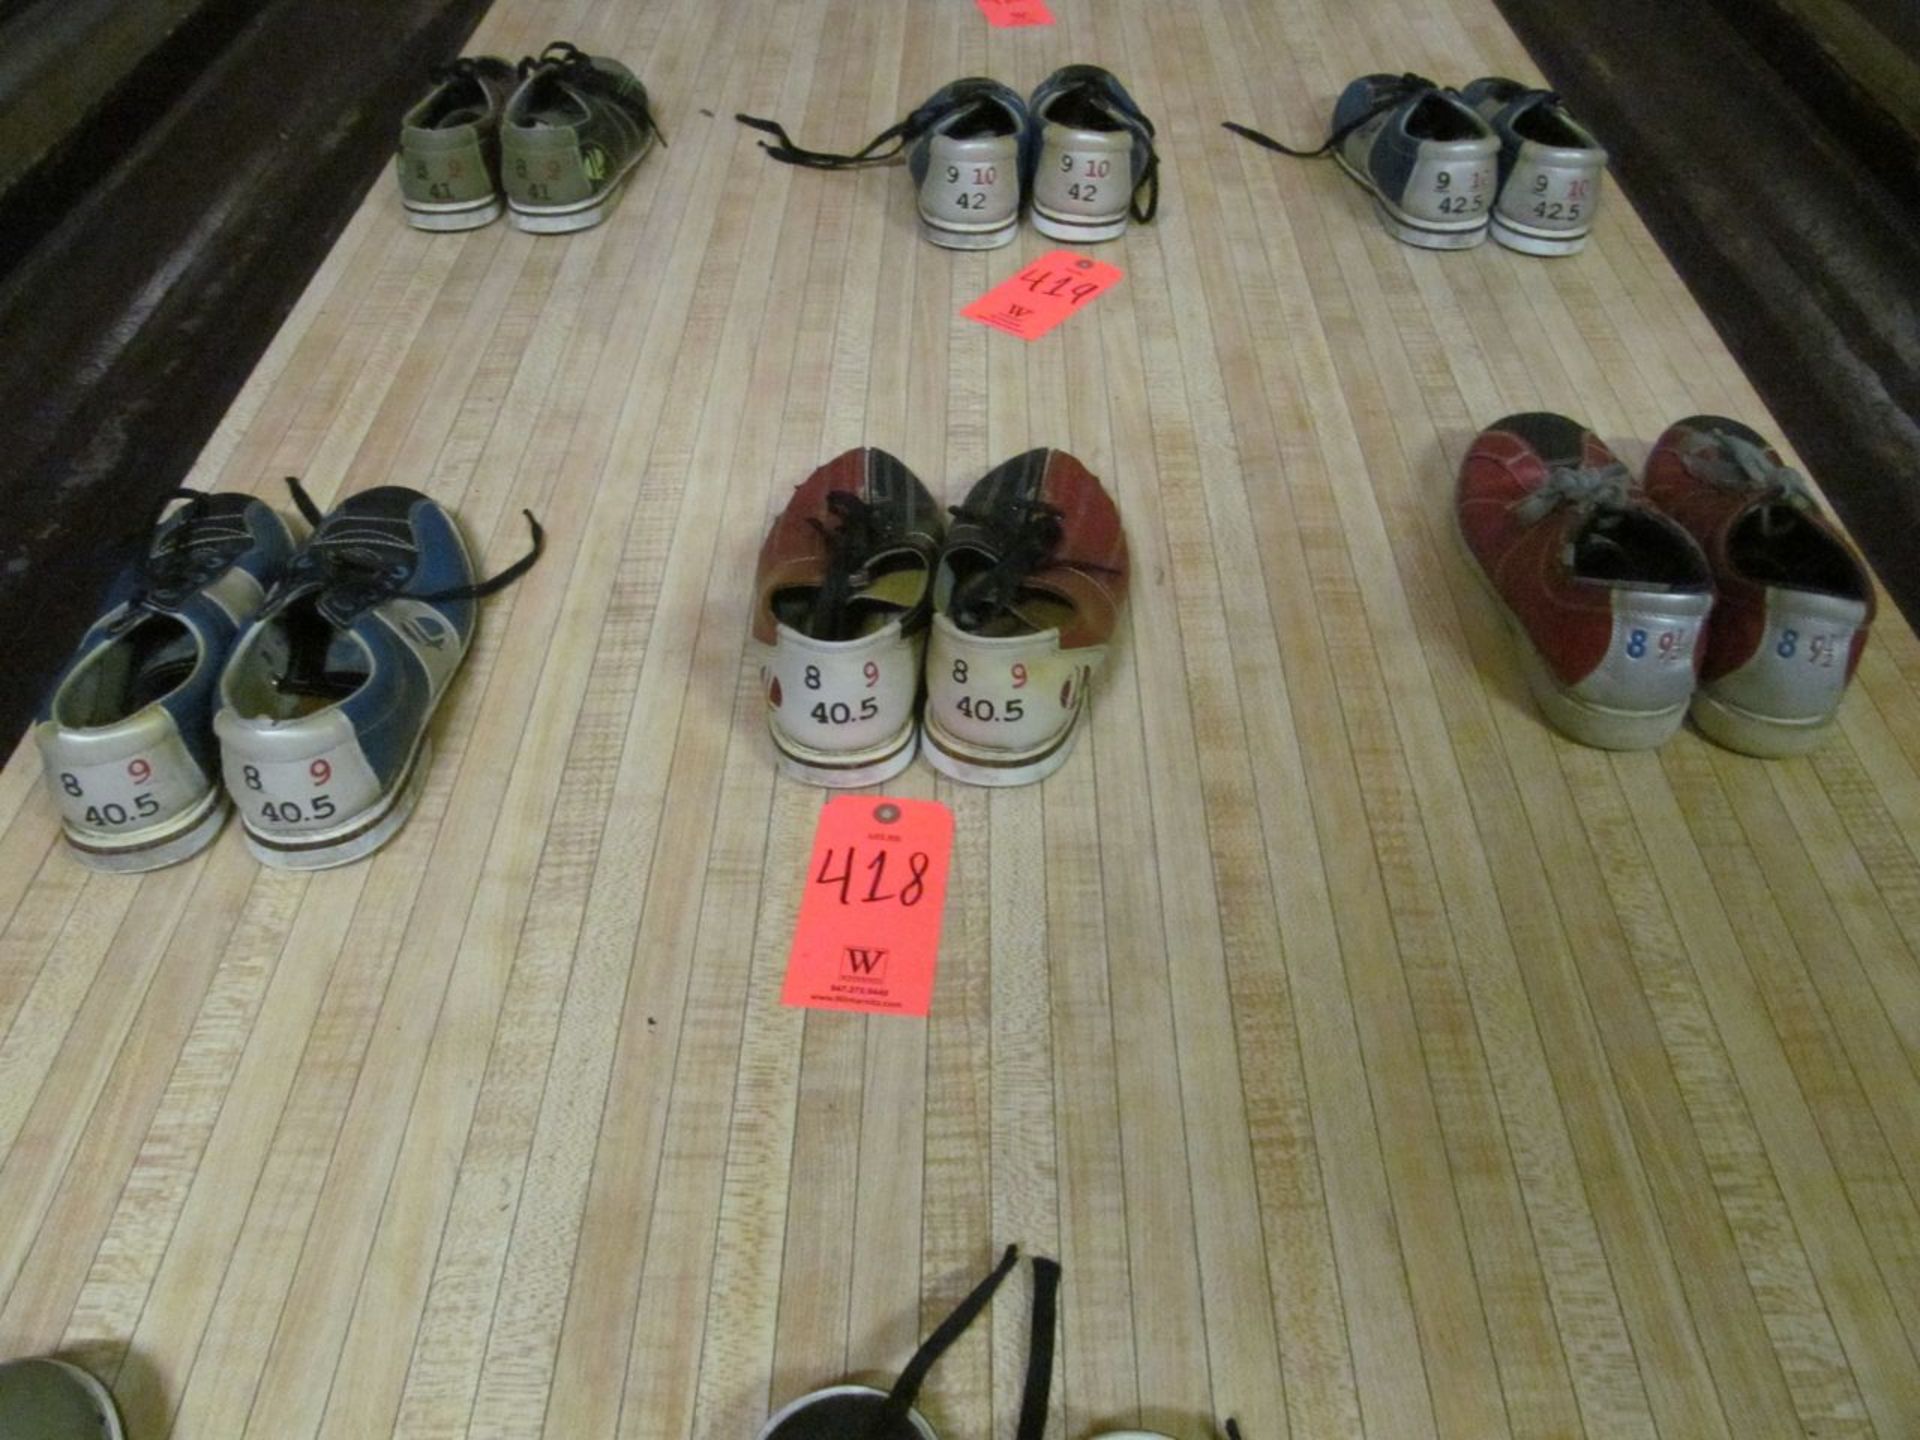 Lot - (3) Pairs of Bowling Shoes (Sizes Shown in 2nd Lot Photo) (Bowling Room) - Image 2 of 2